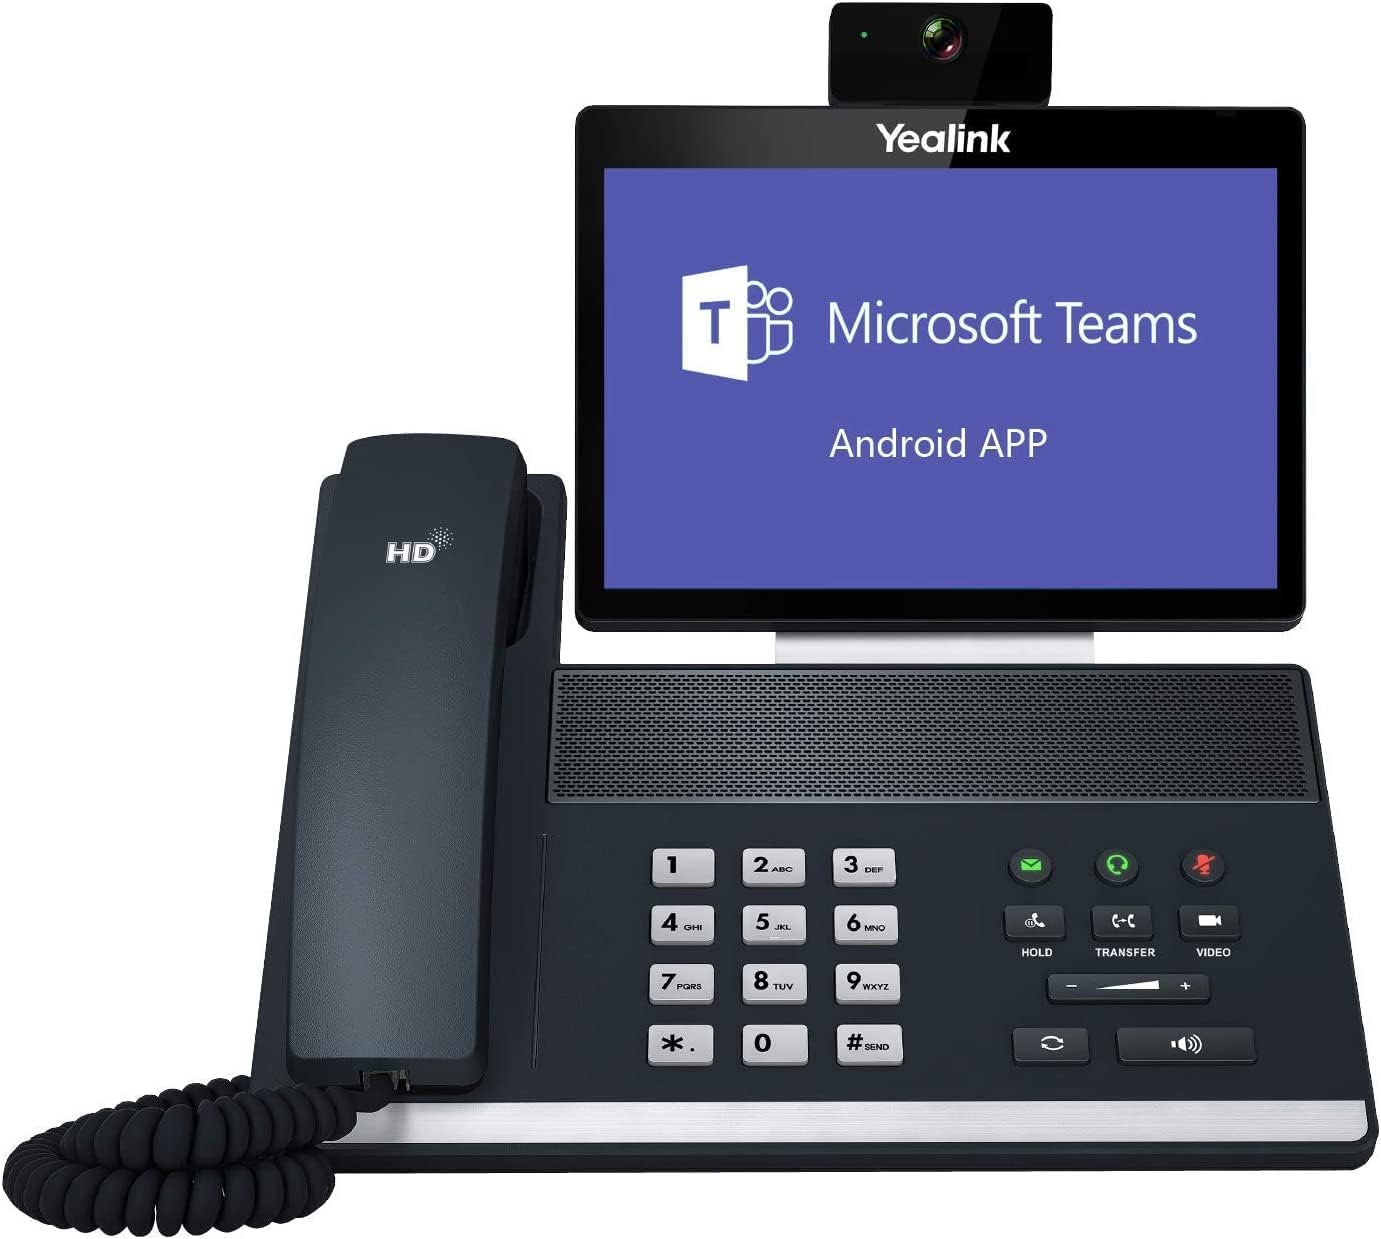 The VP59 video phone integrates voice and video solutions for personal desks. The 8-inch multi-point touch screen and the native Teams interface provide a rich visual presentation and easy menu navigation, which helps reduce the learning curve. Users can start and answer phone calls simply, quickly join and control Teams meetings, and enjoy Teams collaboration at ease with the VP59.